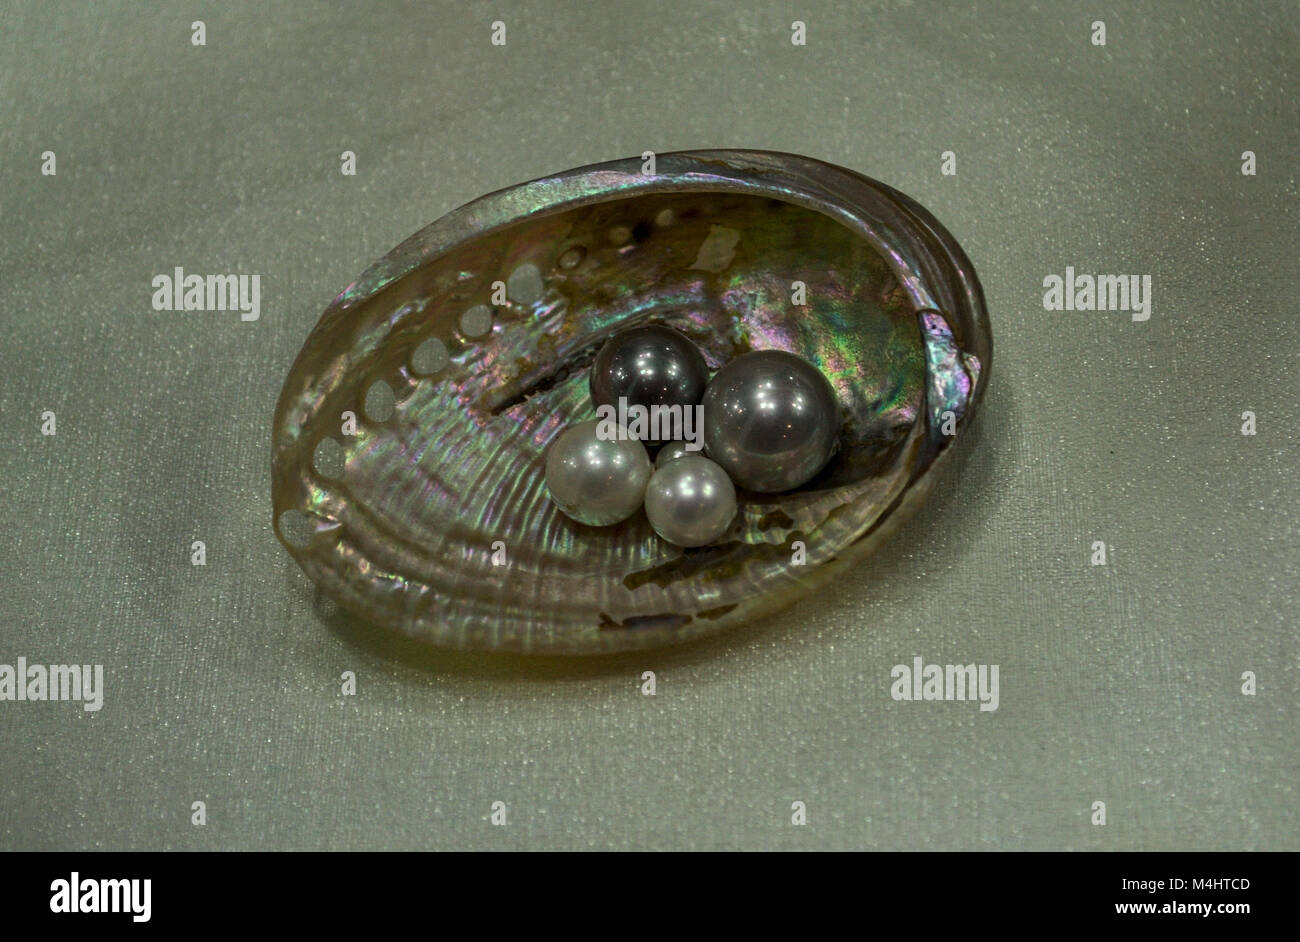 Pearls in oyster shell, close up view Stock Photo